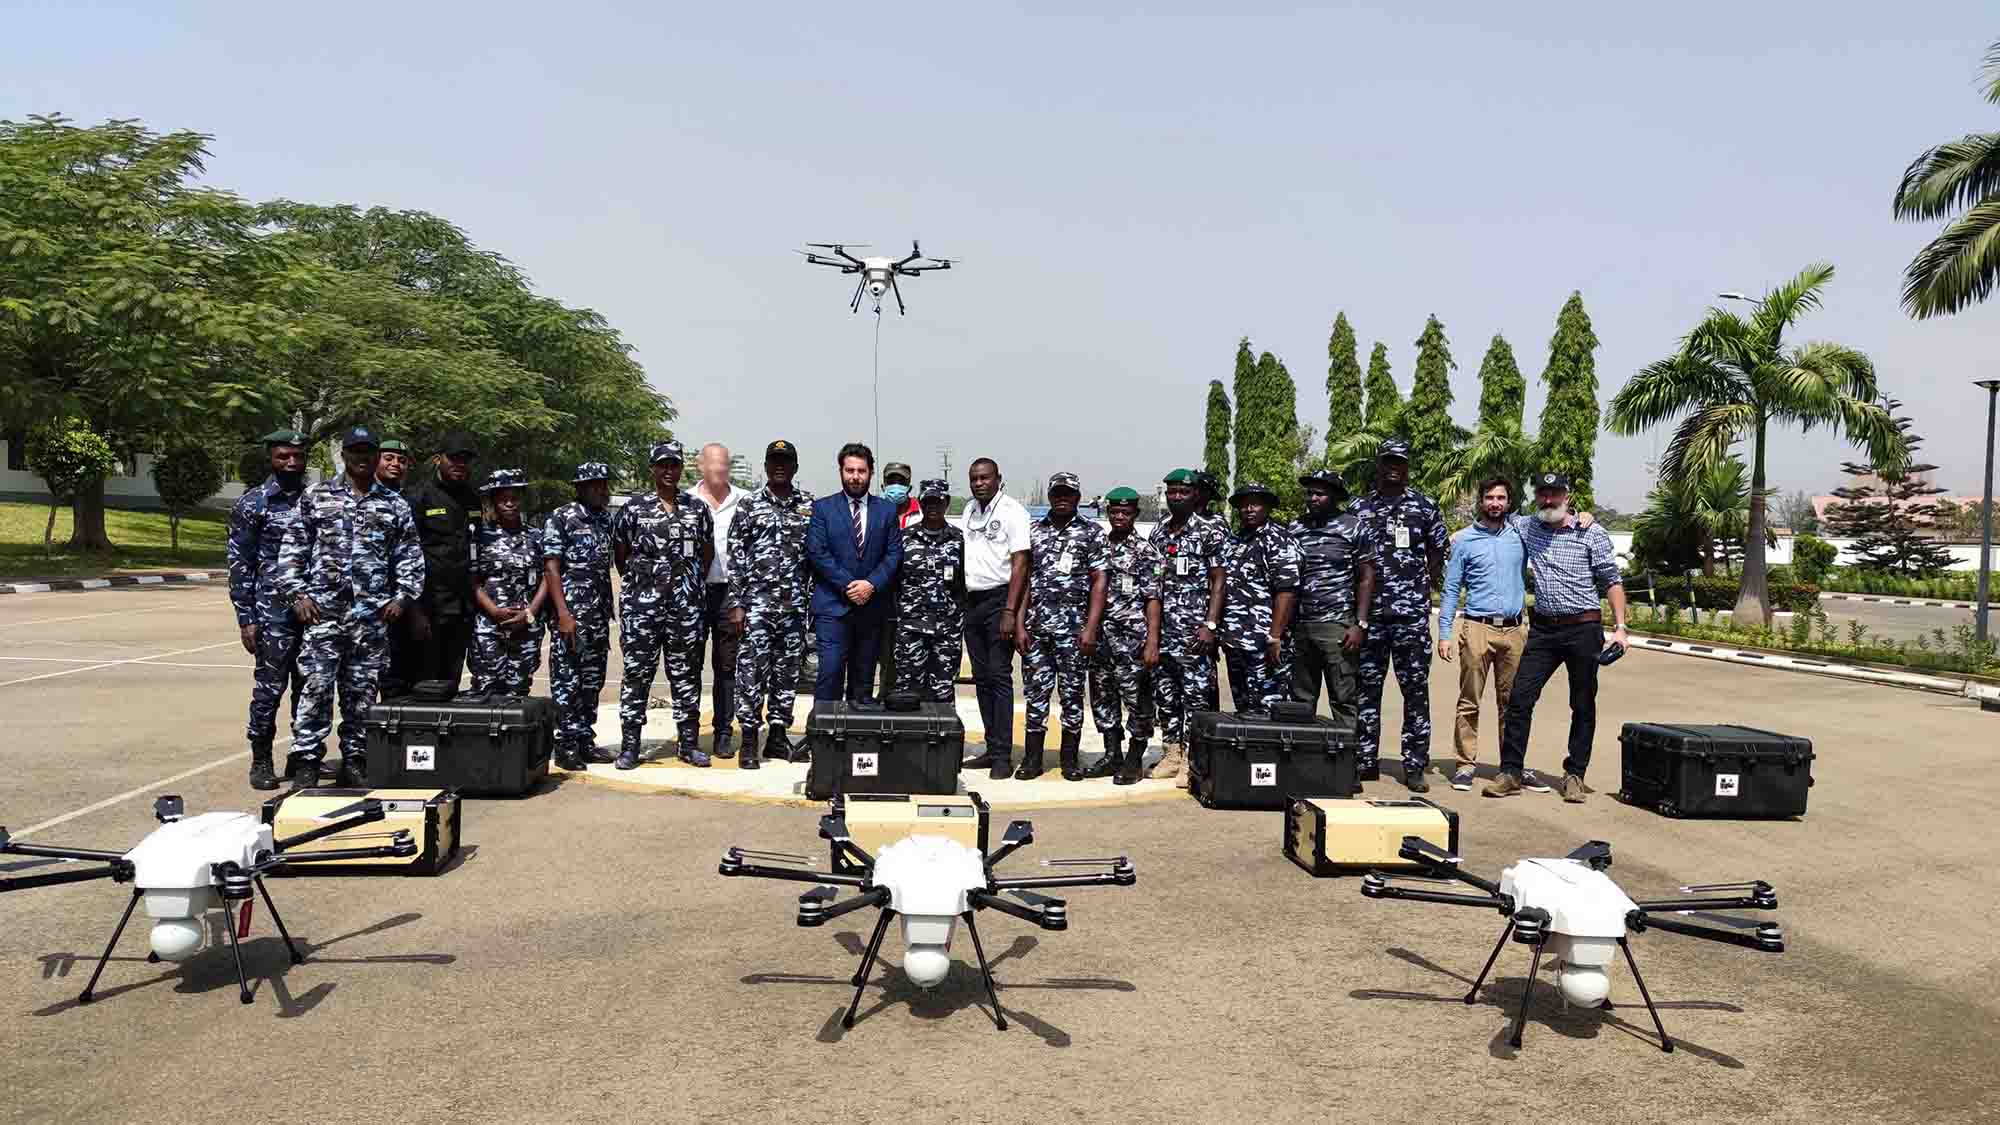 Nigerian Police Drone Team with Elistair Pilots and Orion Drones Systems